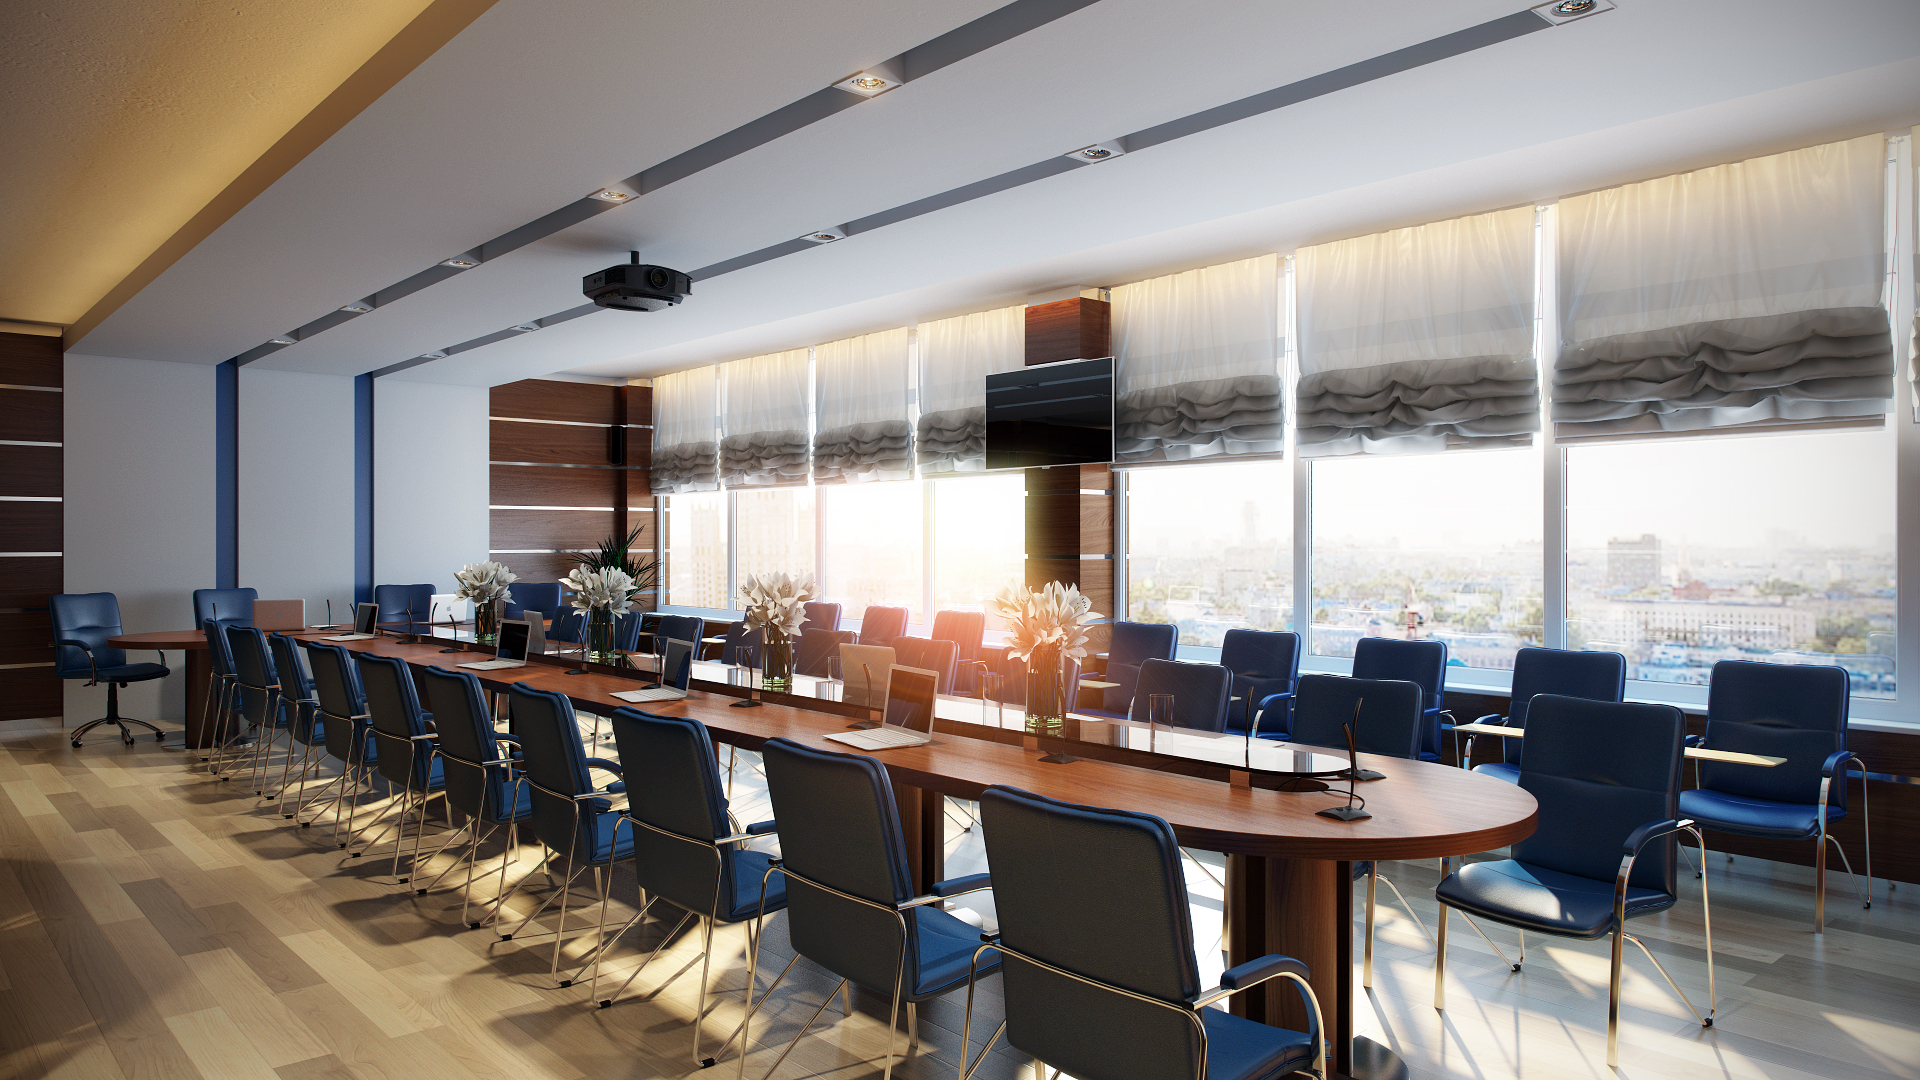 Rating of the best conference rooms in Nizhny Novgorod in 2020